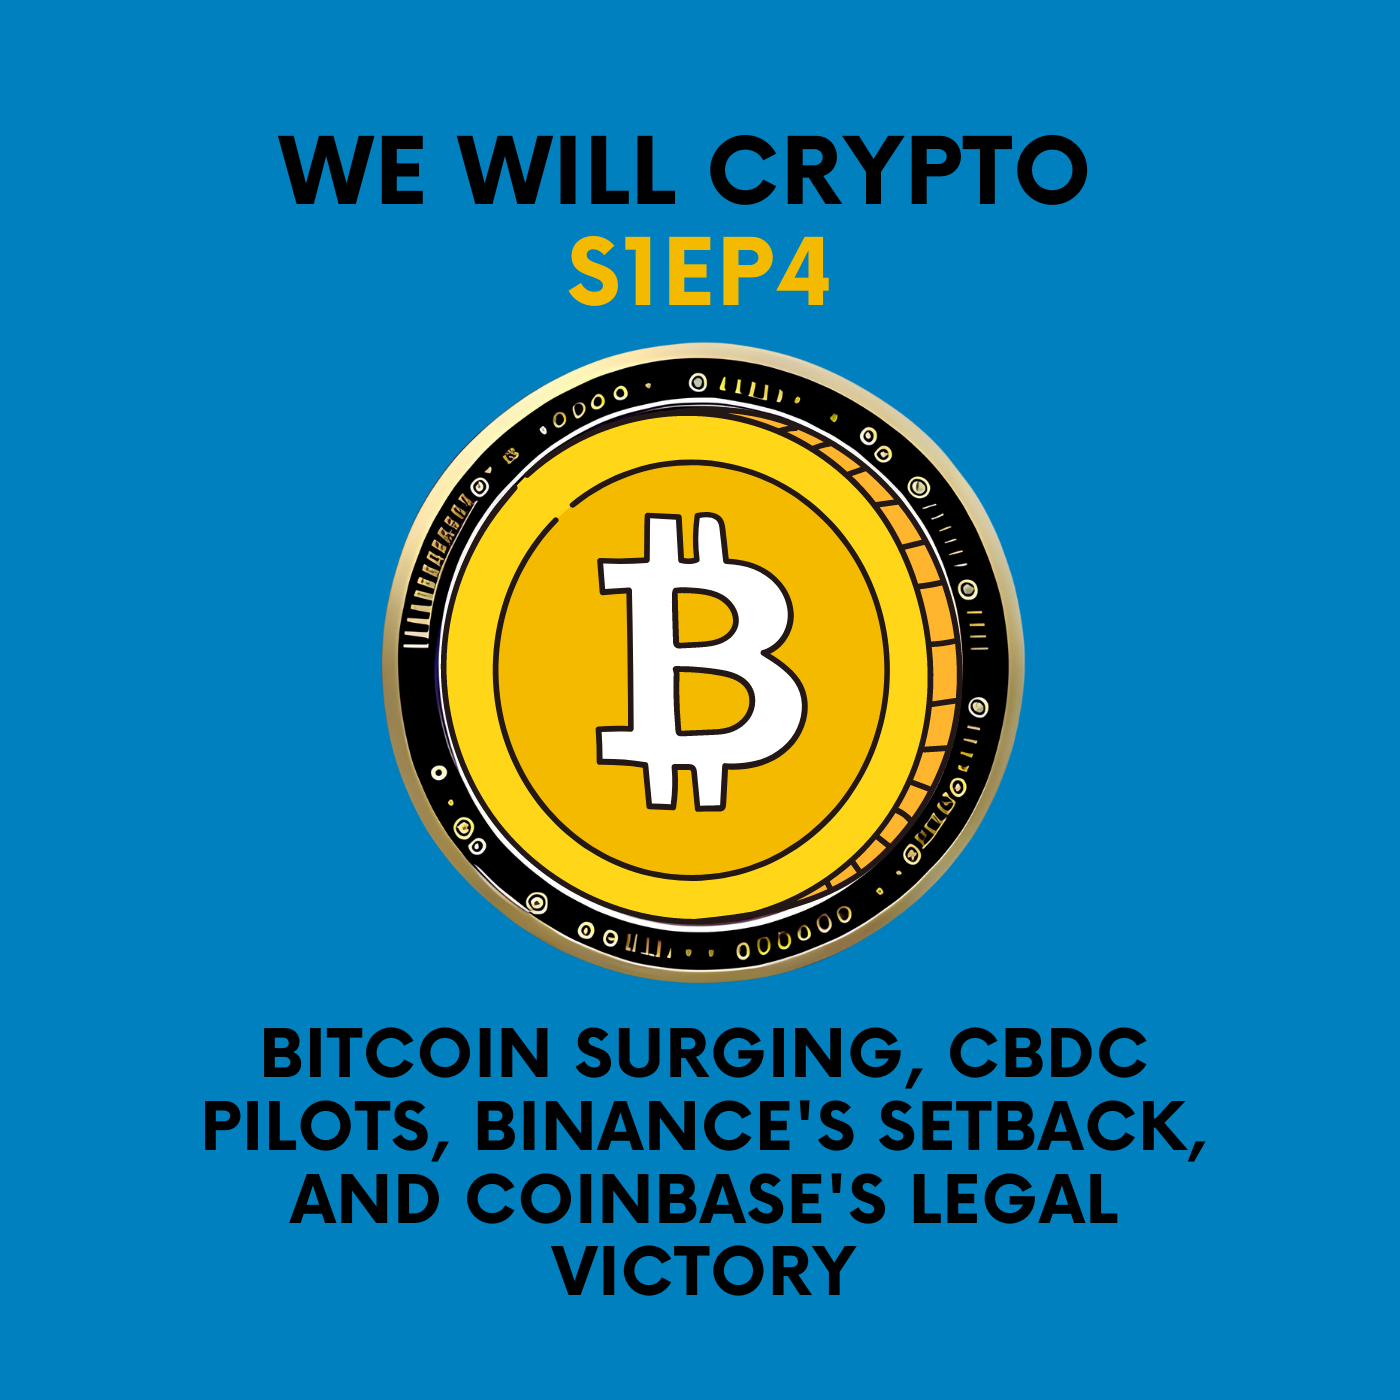 Bitcoin Surging, CBDC Pilots, Regulatory Challenges, Binance’s Setback, and Coinbase’s Legal Victory post thumbnail image